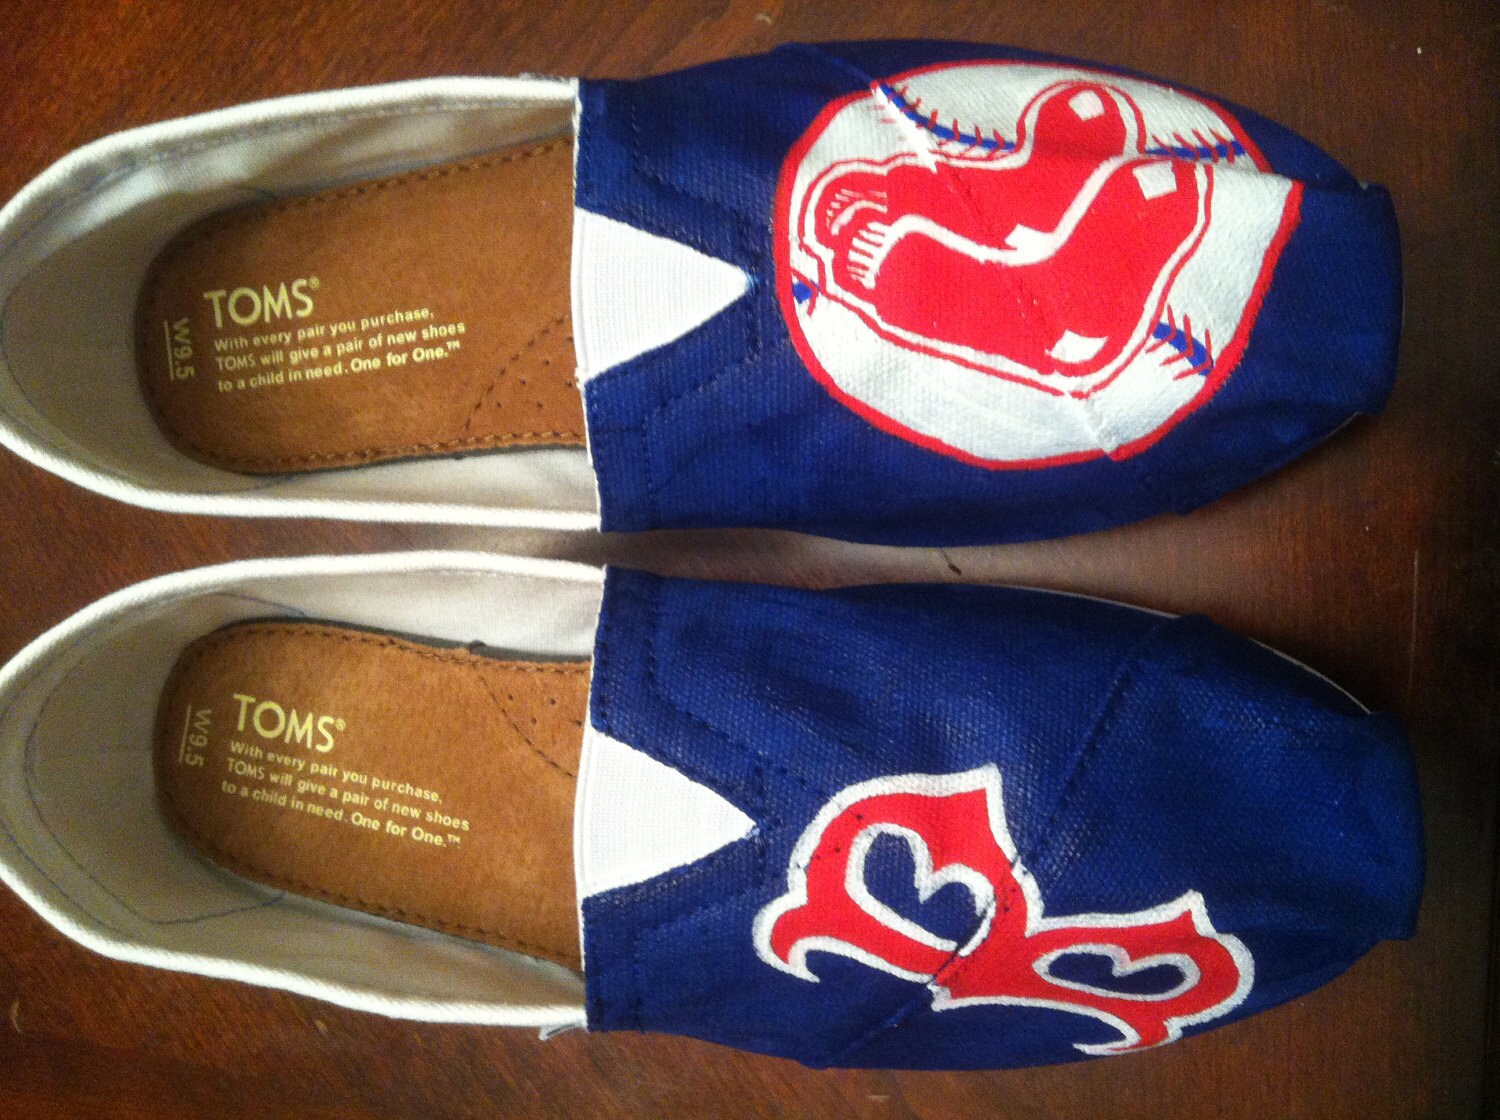 Red Sox Shoes